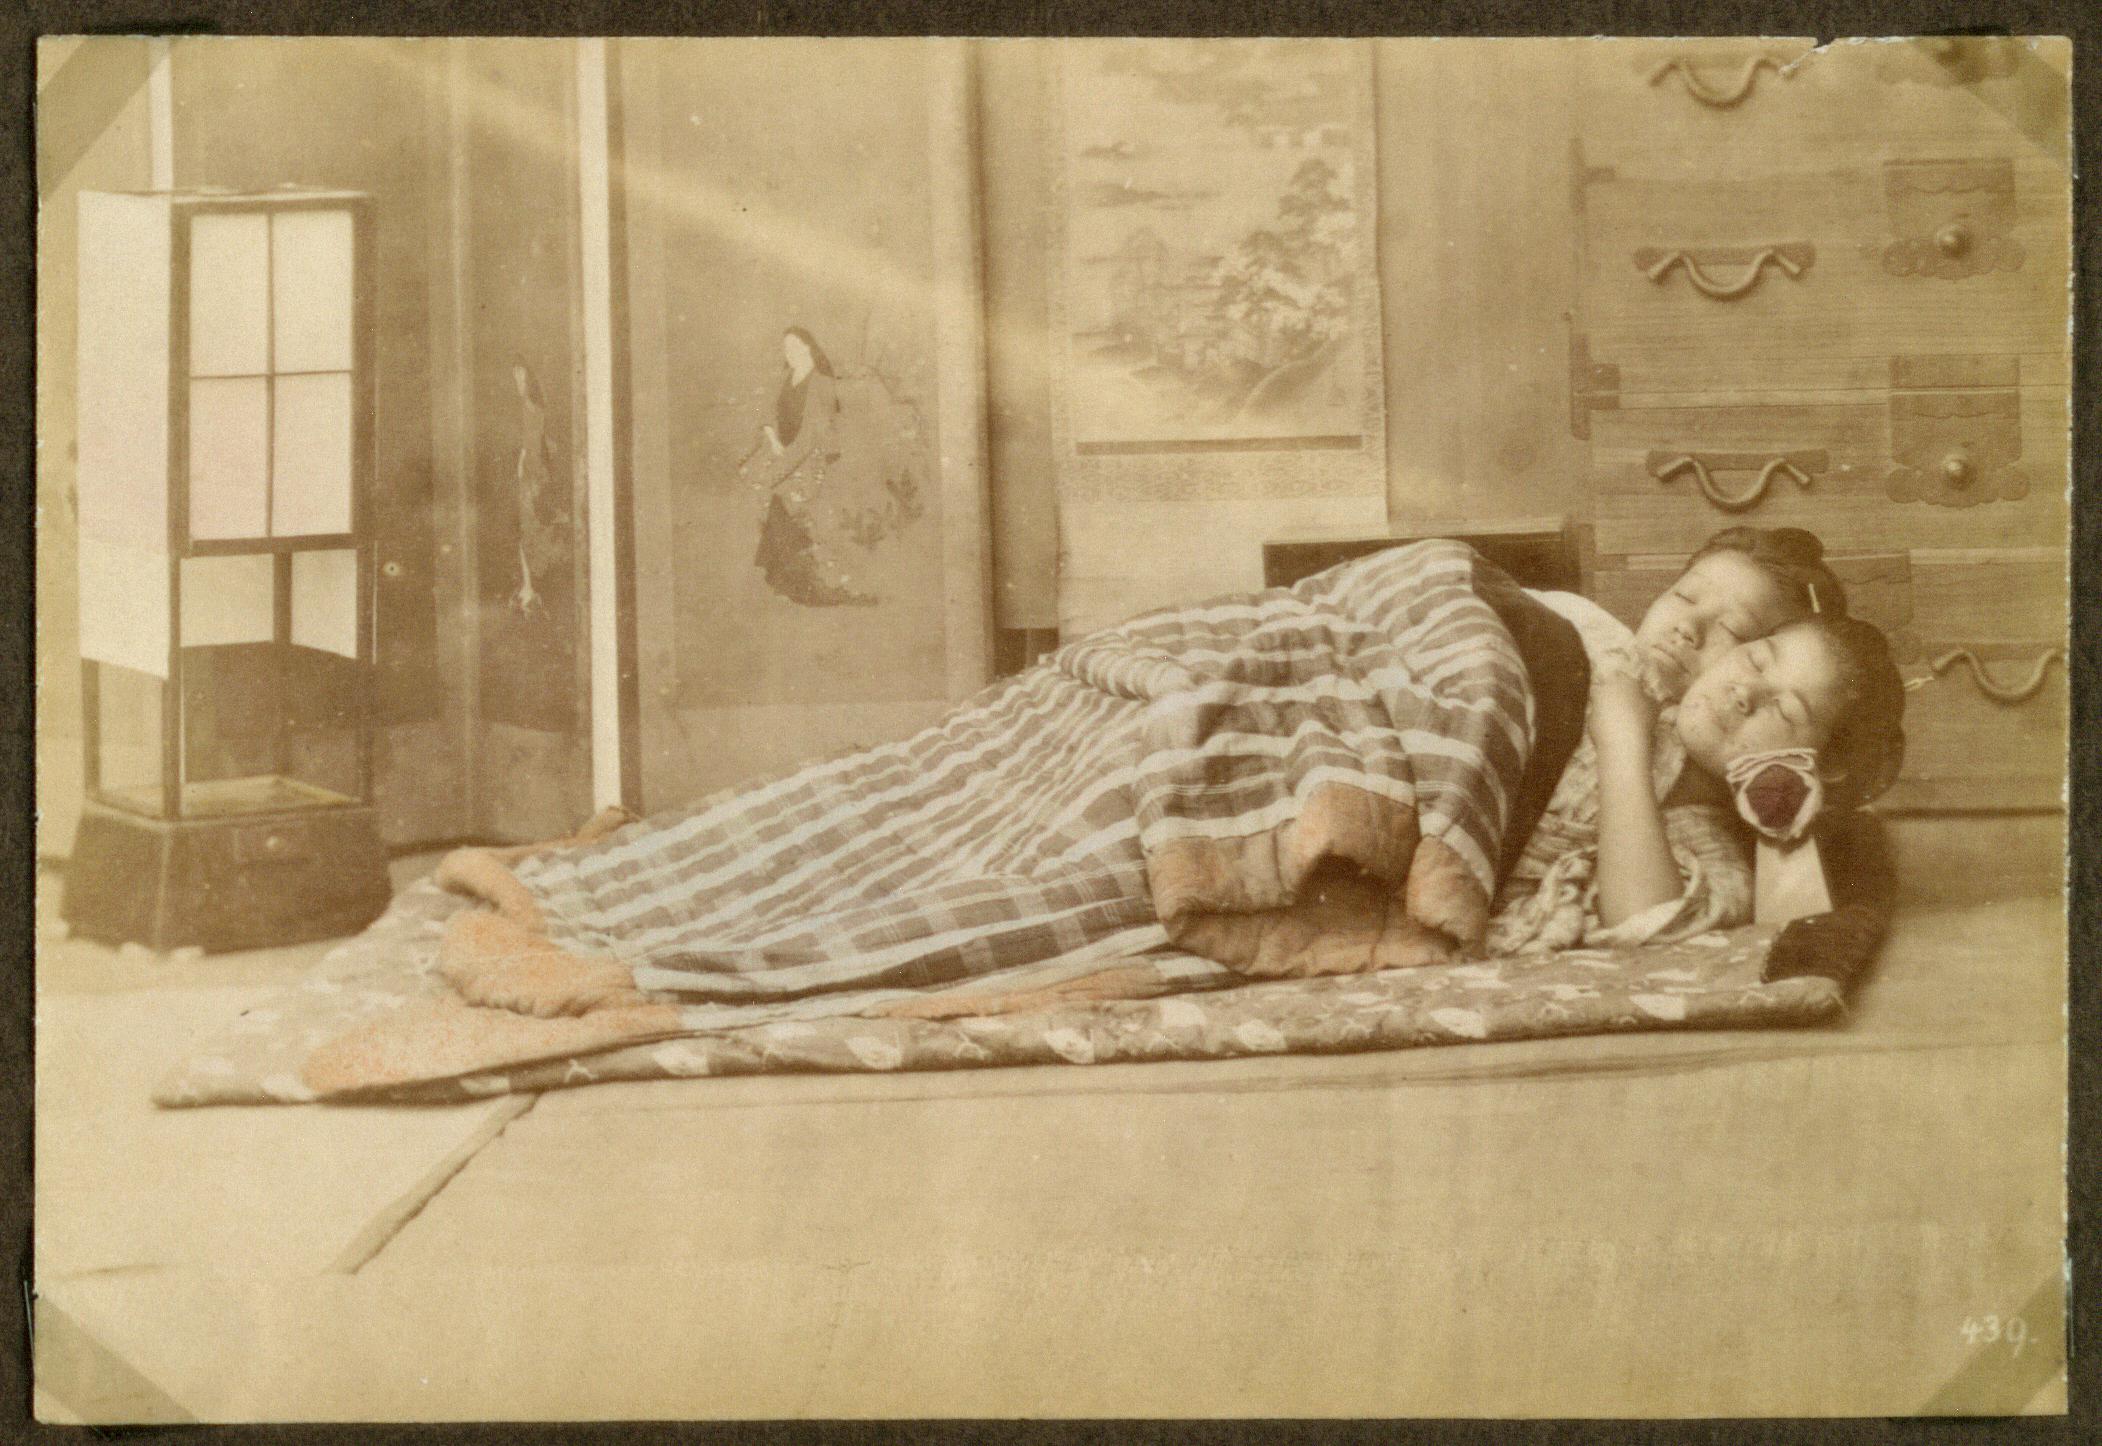 File:Makura (”The Wooden Pillow”) Sleeping women with their heads